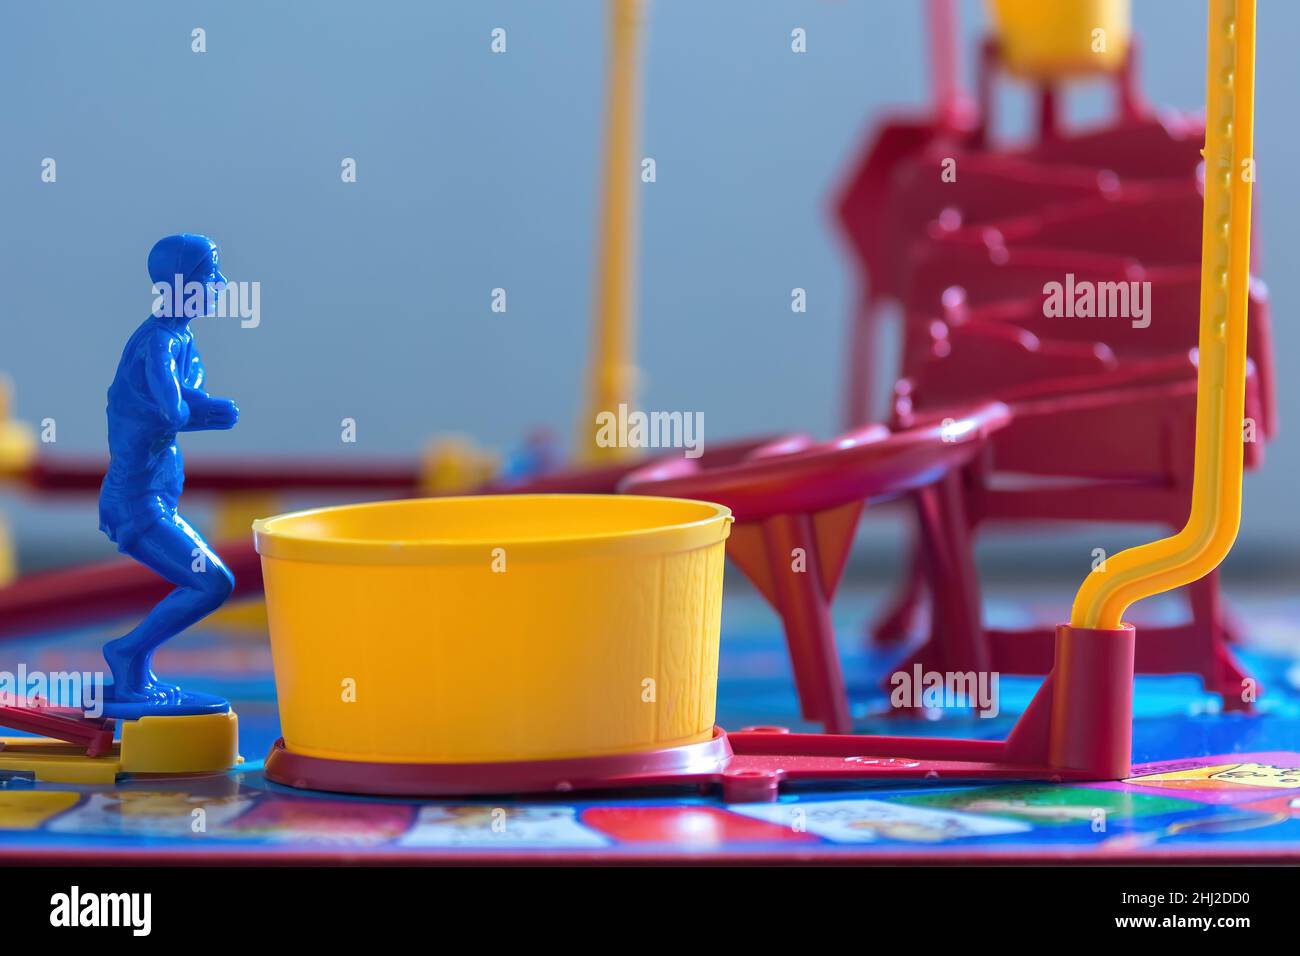 Close up image of the Diver on Mouse Trap Board Game ready to dive into the yellow Pool which sets of the mouse trap. Stock Photo